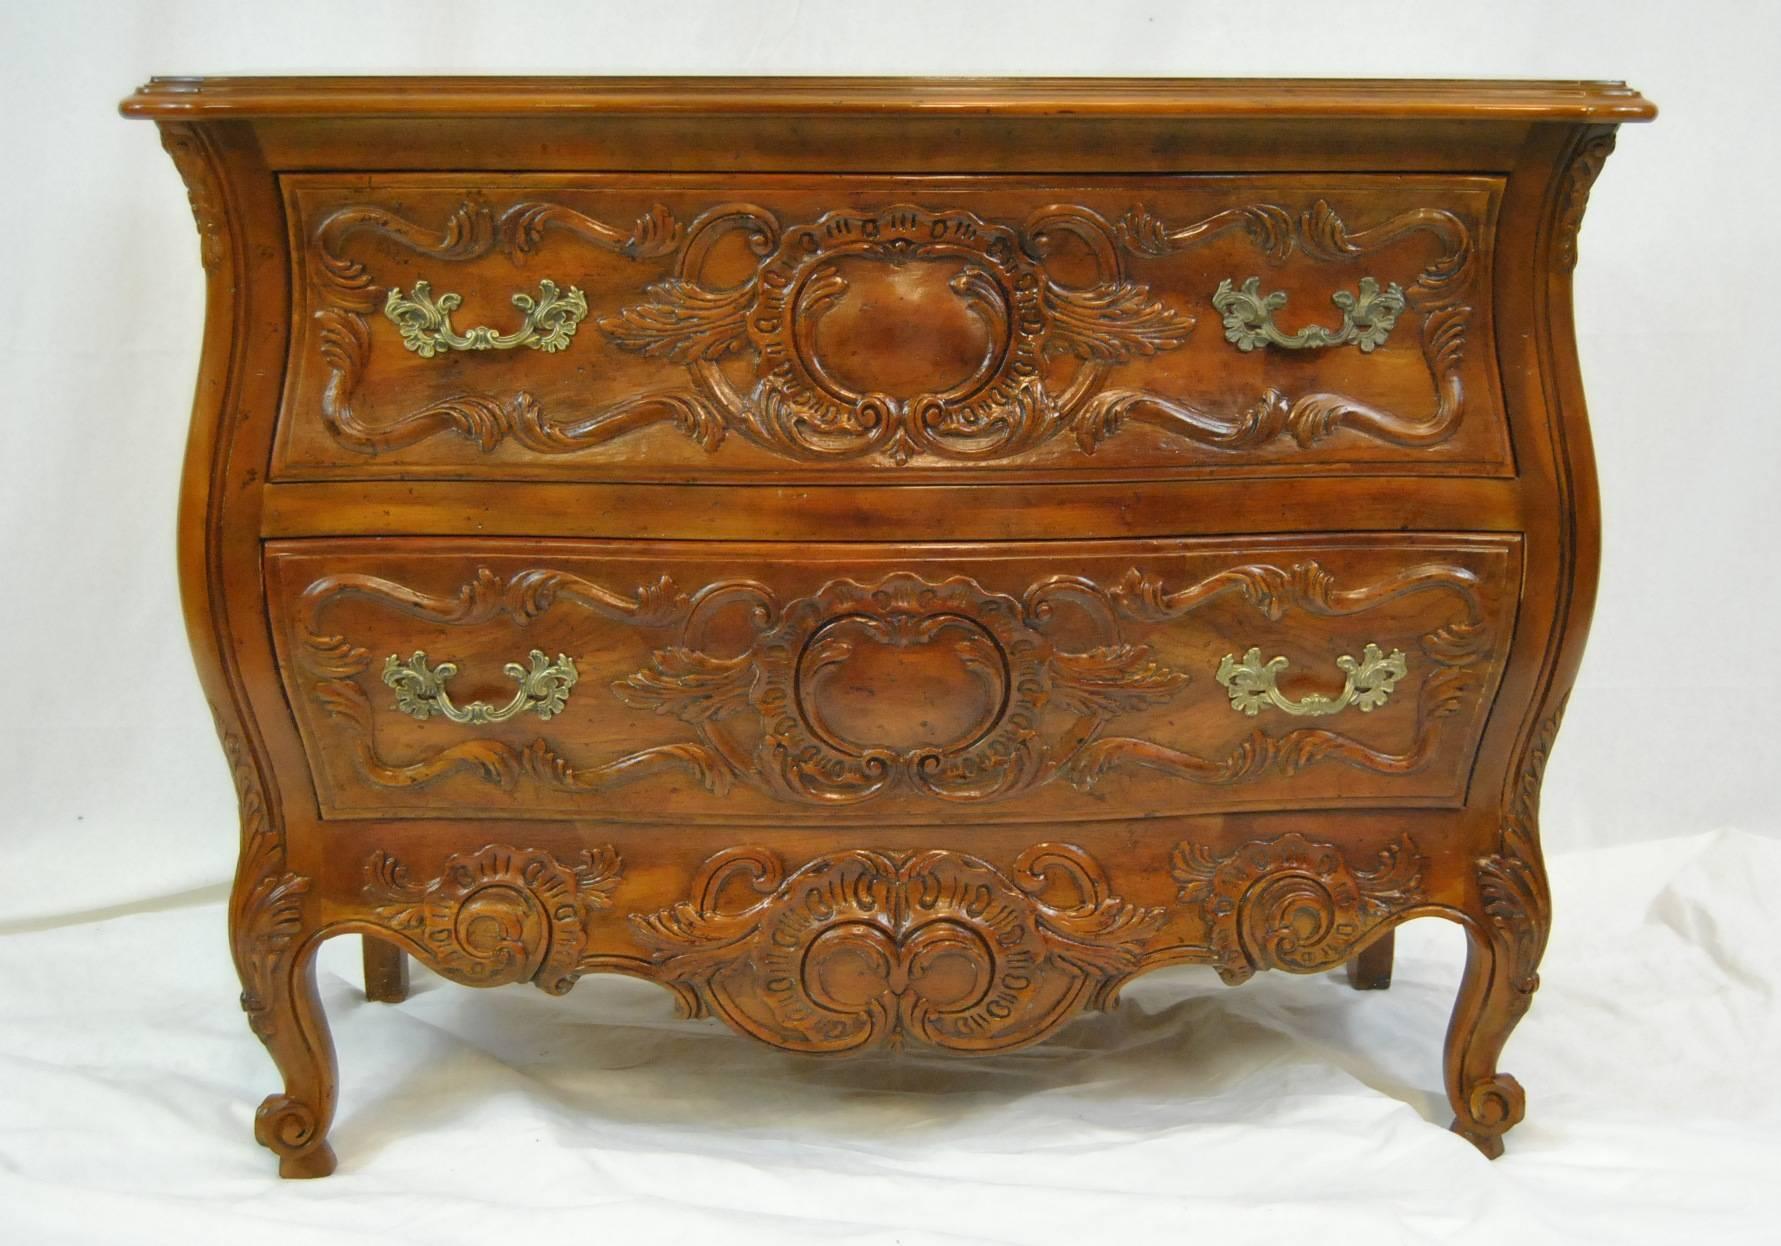 A beautiful walnut two-drawer bombe chest by John Widdicomb carved walnut chests drawer fronts are accented with scrolling foliage motifs.. The chest is raised on four legs, the front two cabriole legs terminating in scrolled feet. Hardware is